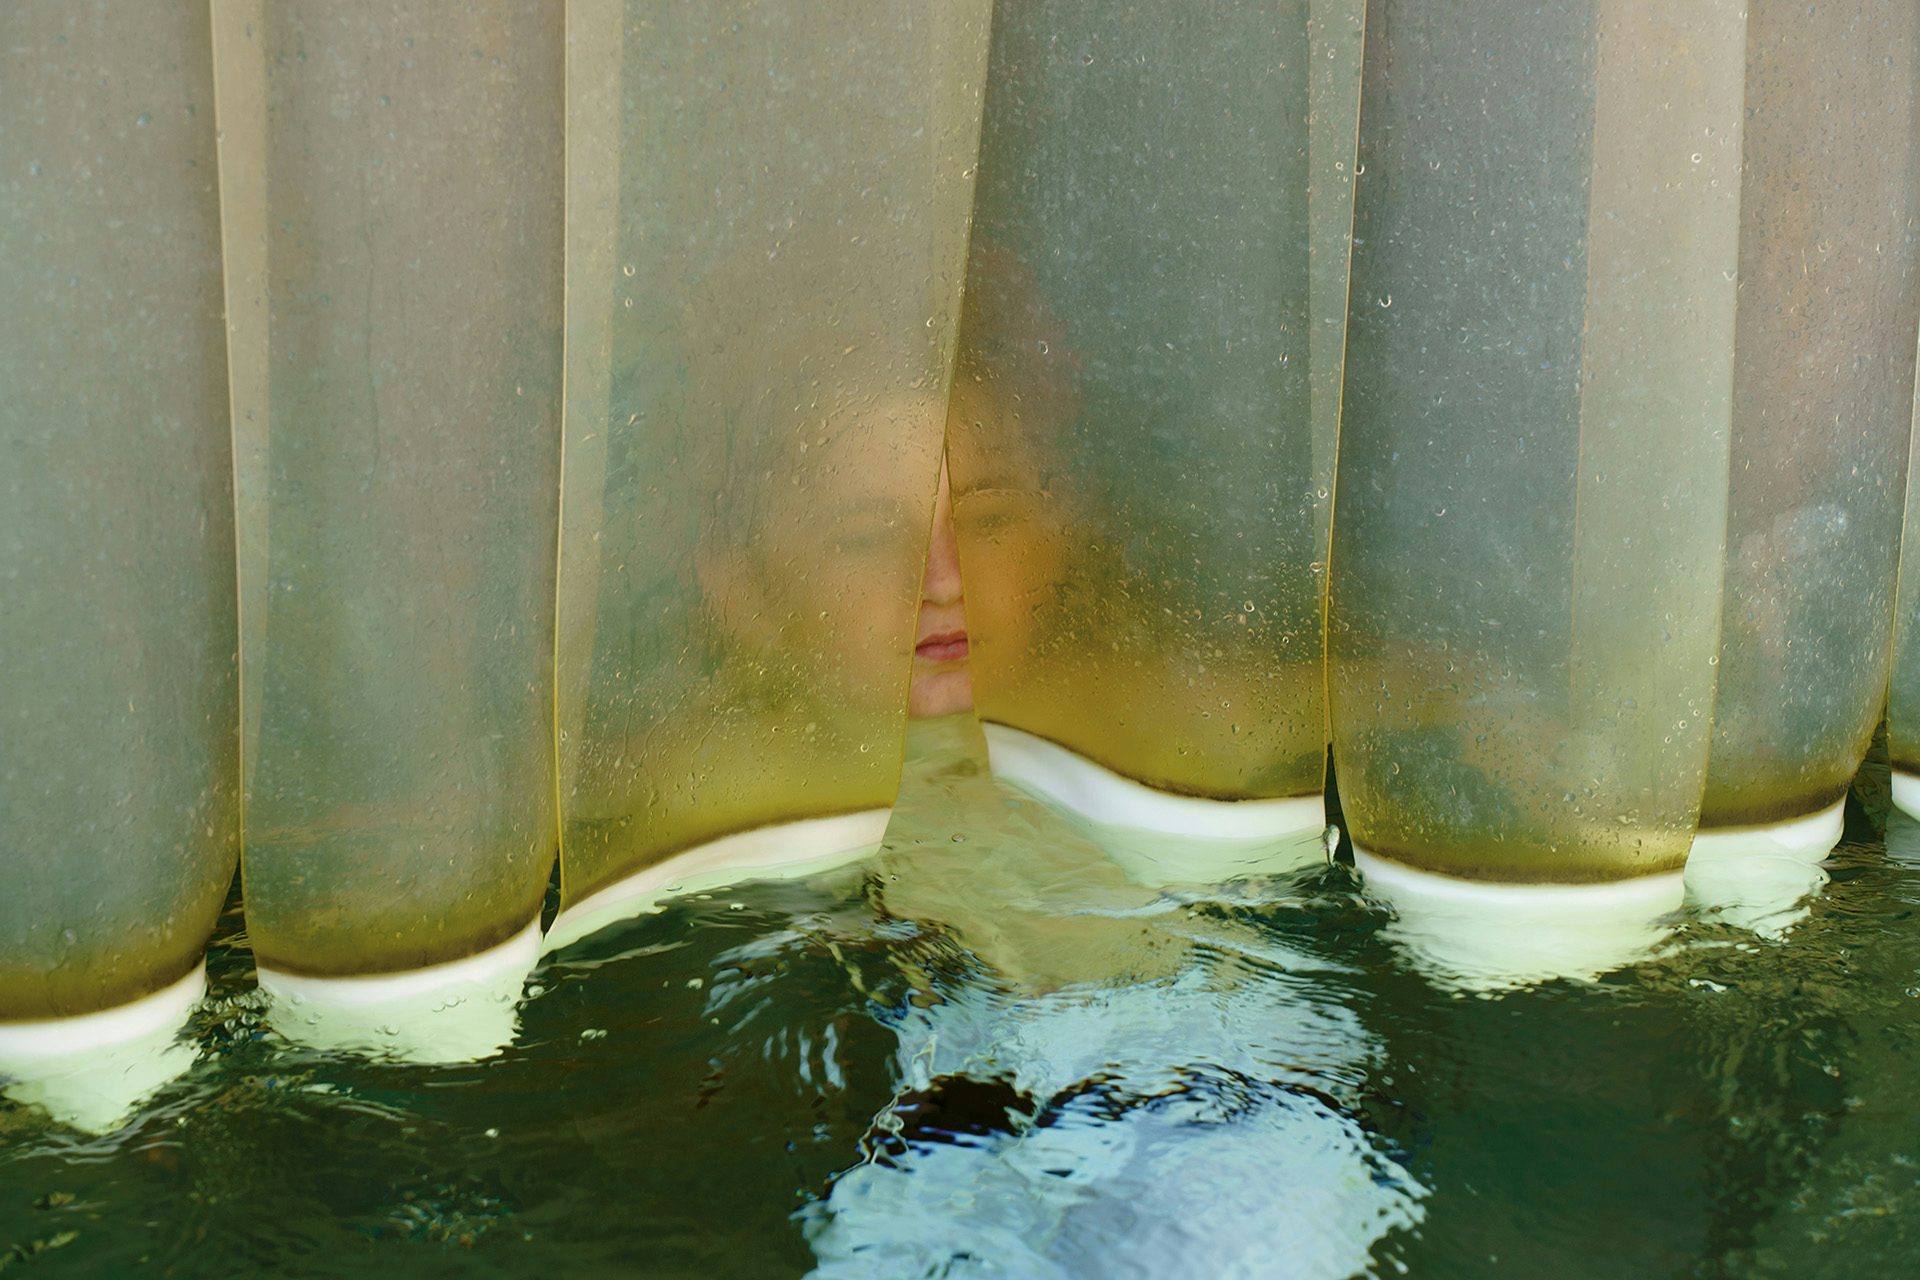 A boy in a pool of water hovering behind a plastic panel curtain